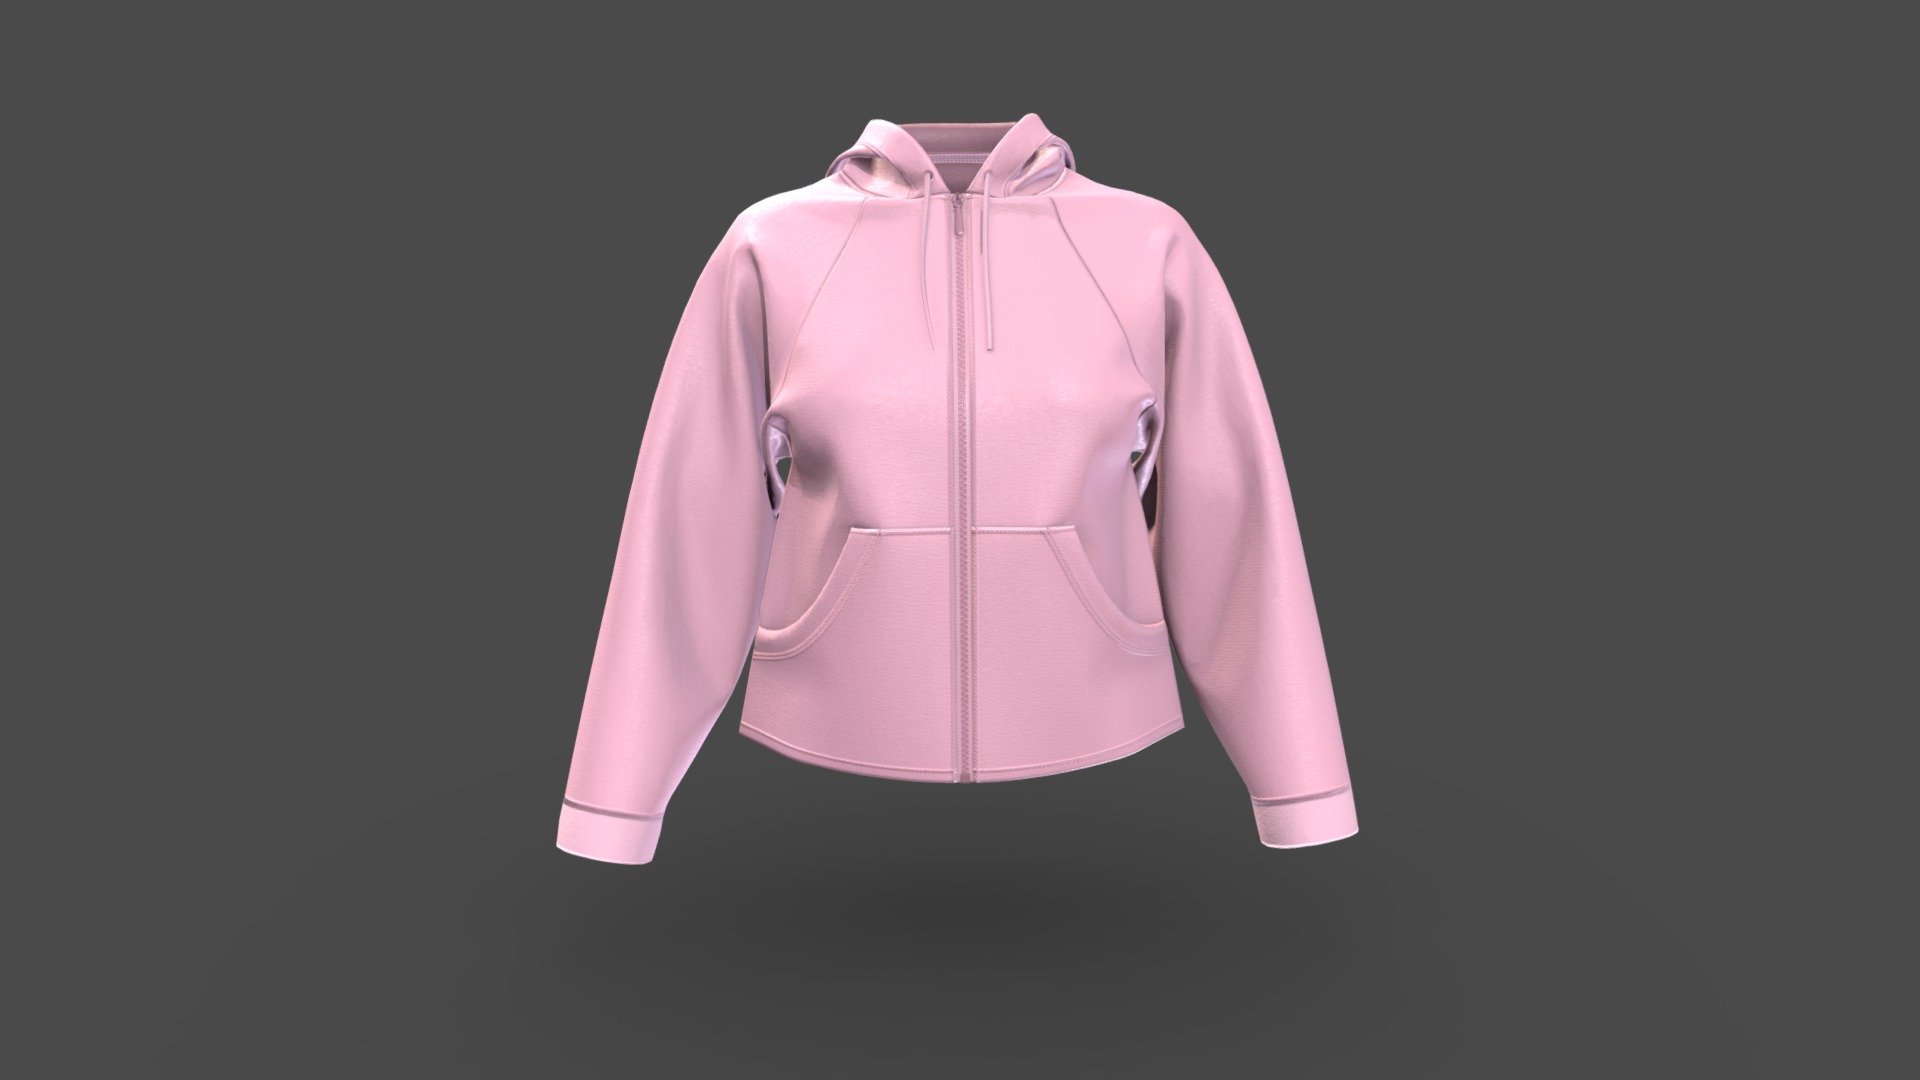 Women Fashionable Hooded Jacket
Version V1.0

Realistic high detailed Women Hooded Jacket with high resolution textures. Model created by our unique processing &amp; Optimized for 3D web and AR / VR

Features

Optimized &amp; NON-Optimized obj model with 4K texture included




Optimized for AR/VR/MR

4K &amp; 2K fabric texture and print details

Optimized model is 1.8MB

NON-Optimized model is 19.1MB

Knit fabric texture and print details included

GLB file in 2k texture size is 4.41MB

GLB file in 4k texture size is 20.3MB (Game &amp; Animation Ready)

Suitable for web application configurator development.

Fully unwrap UV

The model has 1 material

Includes high detailed normal map

Unit measurment was inch

Triangular Mesh with 16.3k Vertices

Texture map: Base color, OcclusionRoughnessMetallic(ORM), Normal

Tpose  available on request

For more details or custom order send email: hello@binarycloth.com


Website:binarycloth.com - Women Fashionable Hooded Jacket - Buy Royalty Free 3D model by BINARYCLOTH (@binaryclothofficial) 3d model